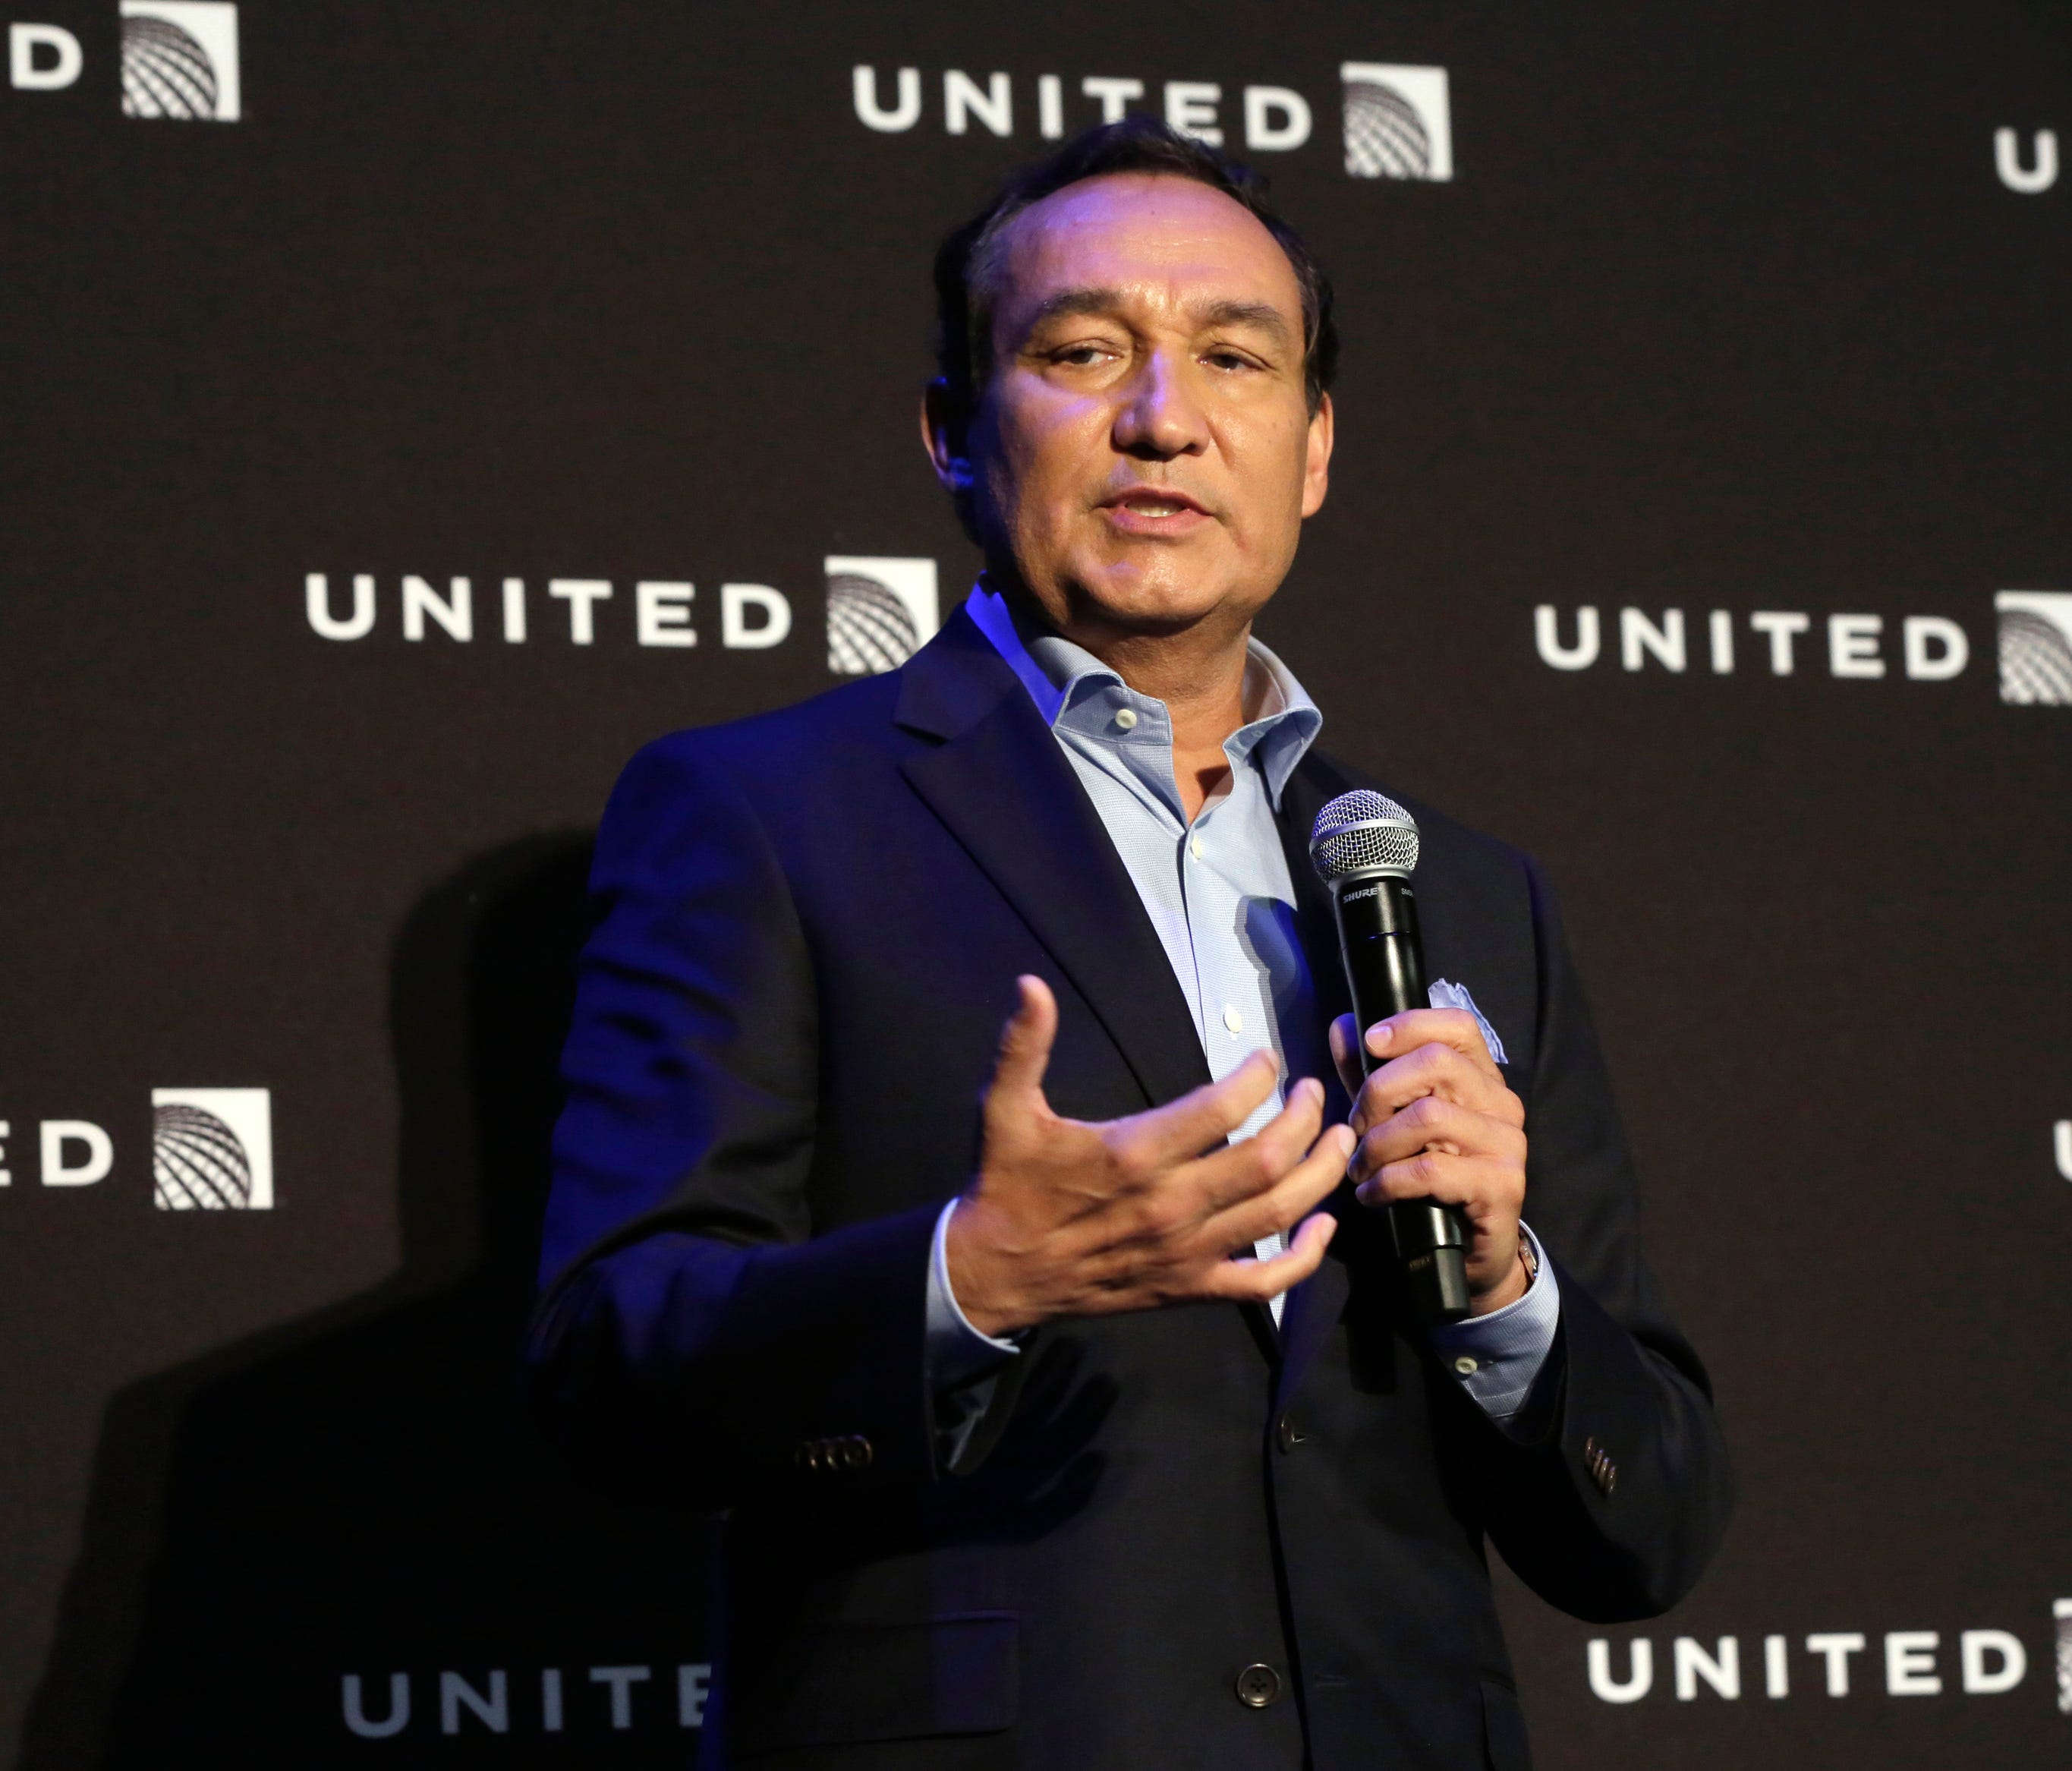 This file photo from June 2, 2016, shows United Airlines CEO Oscar Munoz at a presentation in New York.